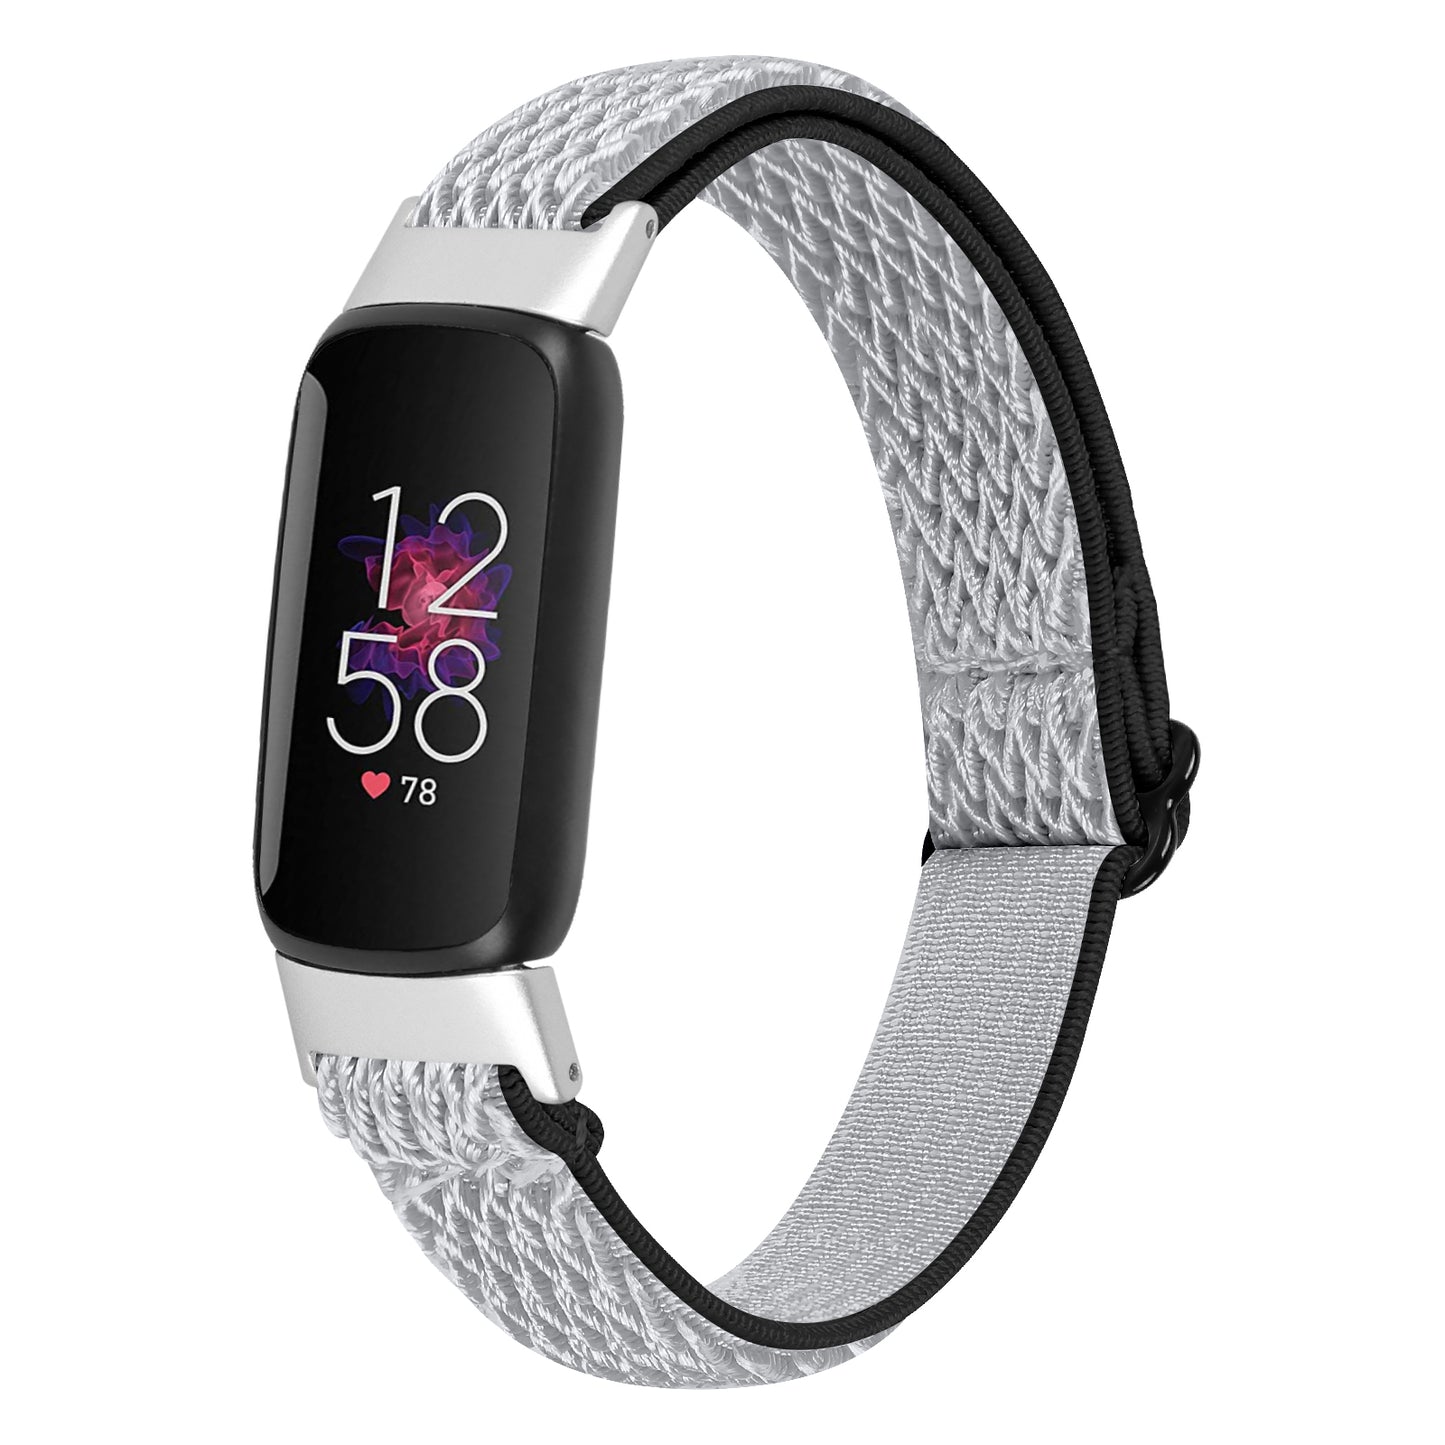 Fitbit Luxe Fitness Tracker in Black/Stainless Steel